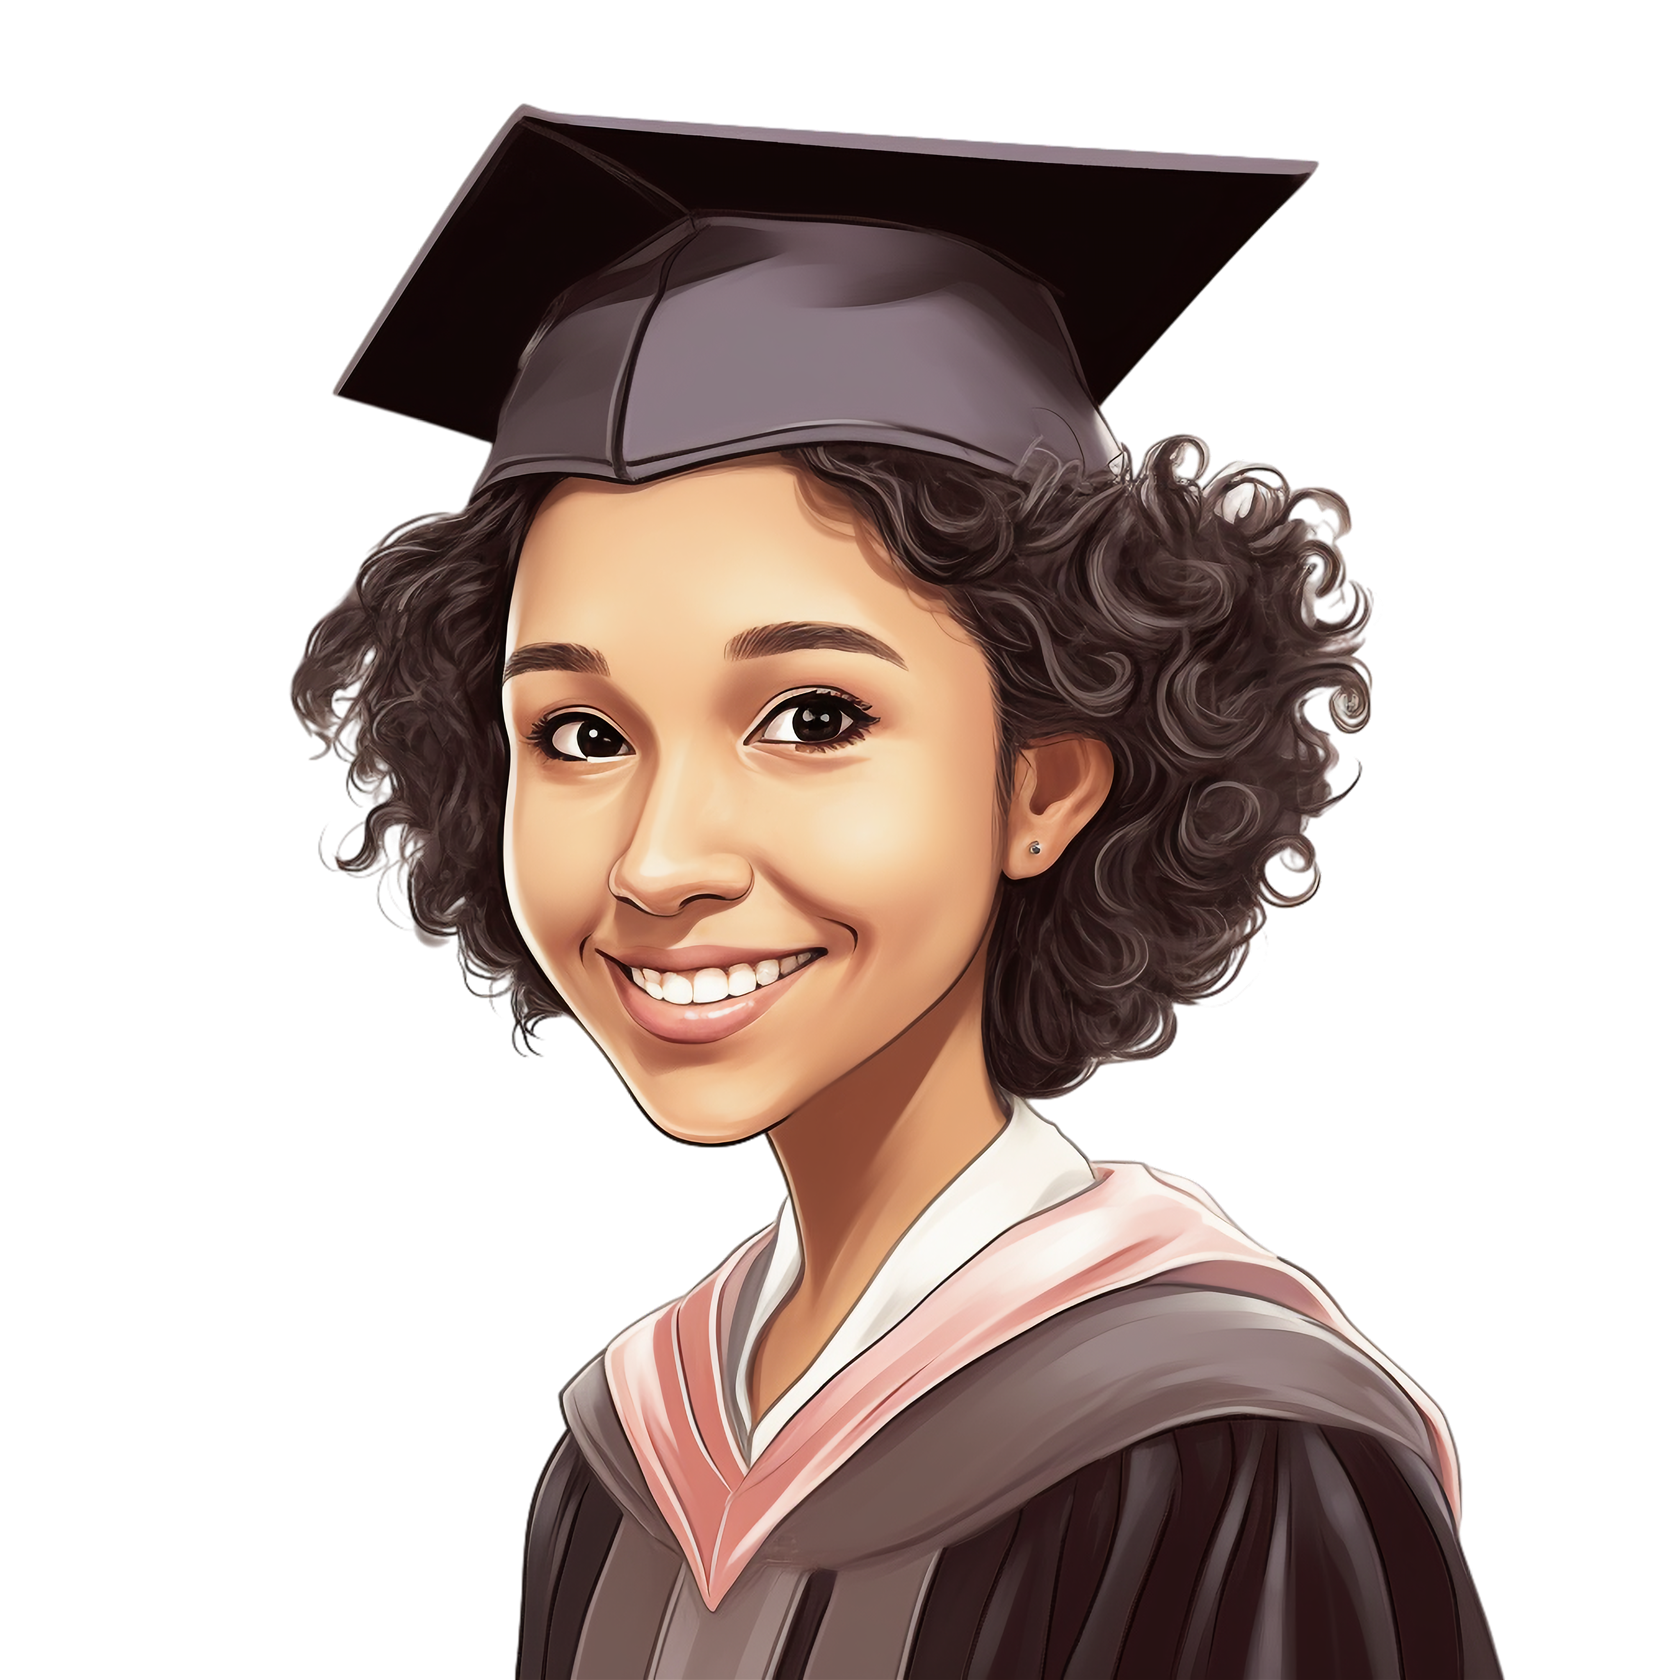  Girl in cap and gown